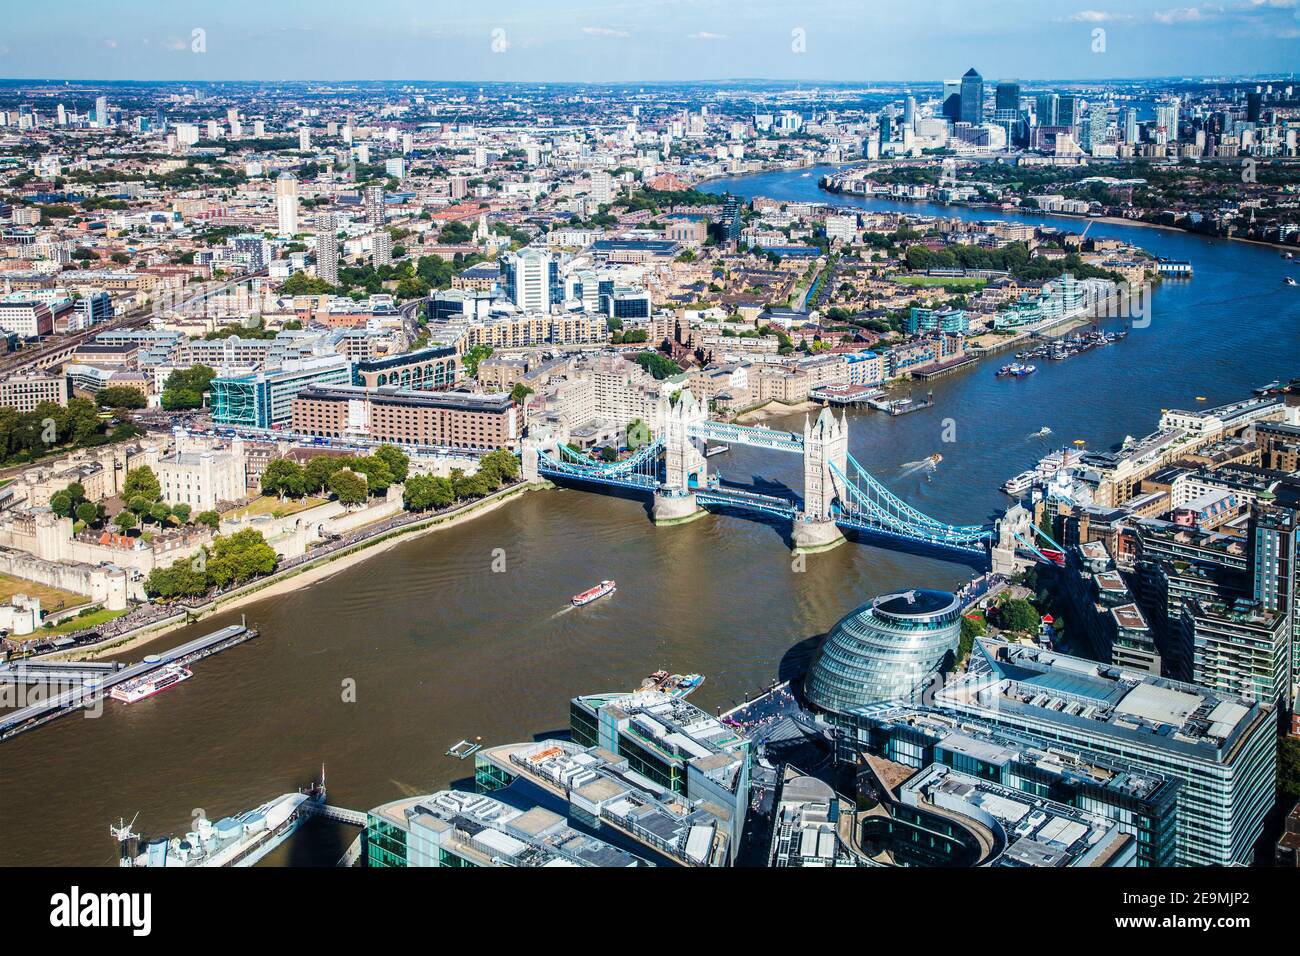 The view from the Shard over London. Stock Photo